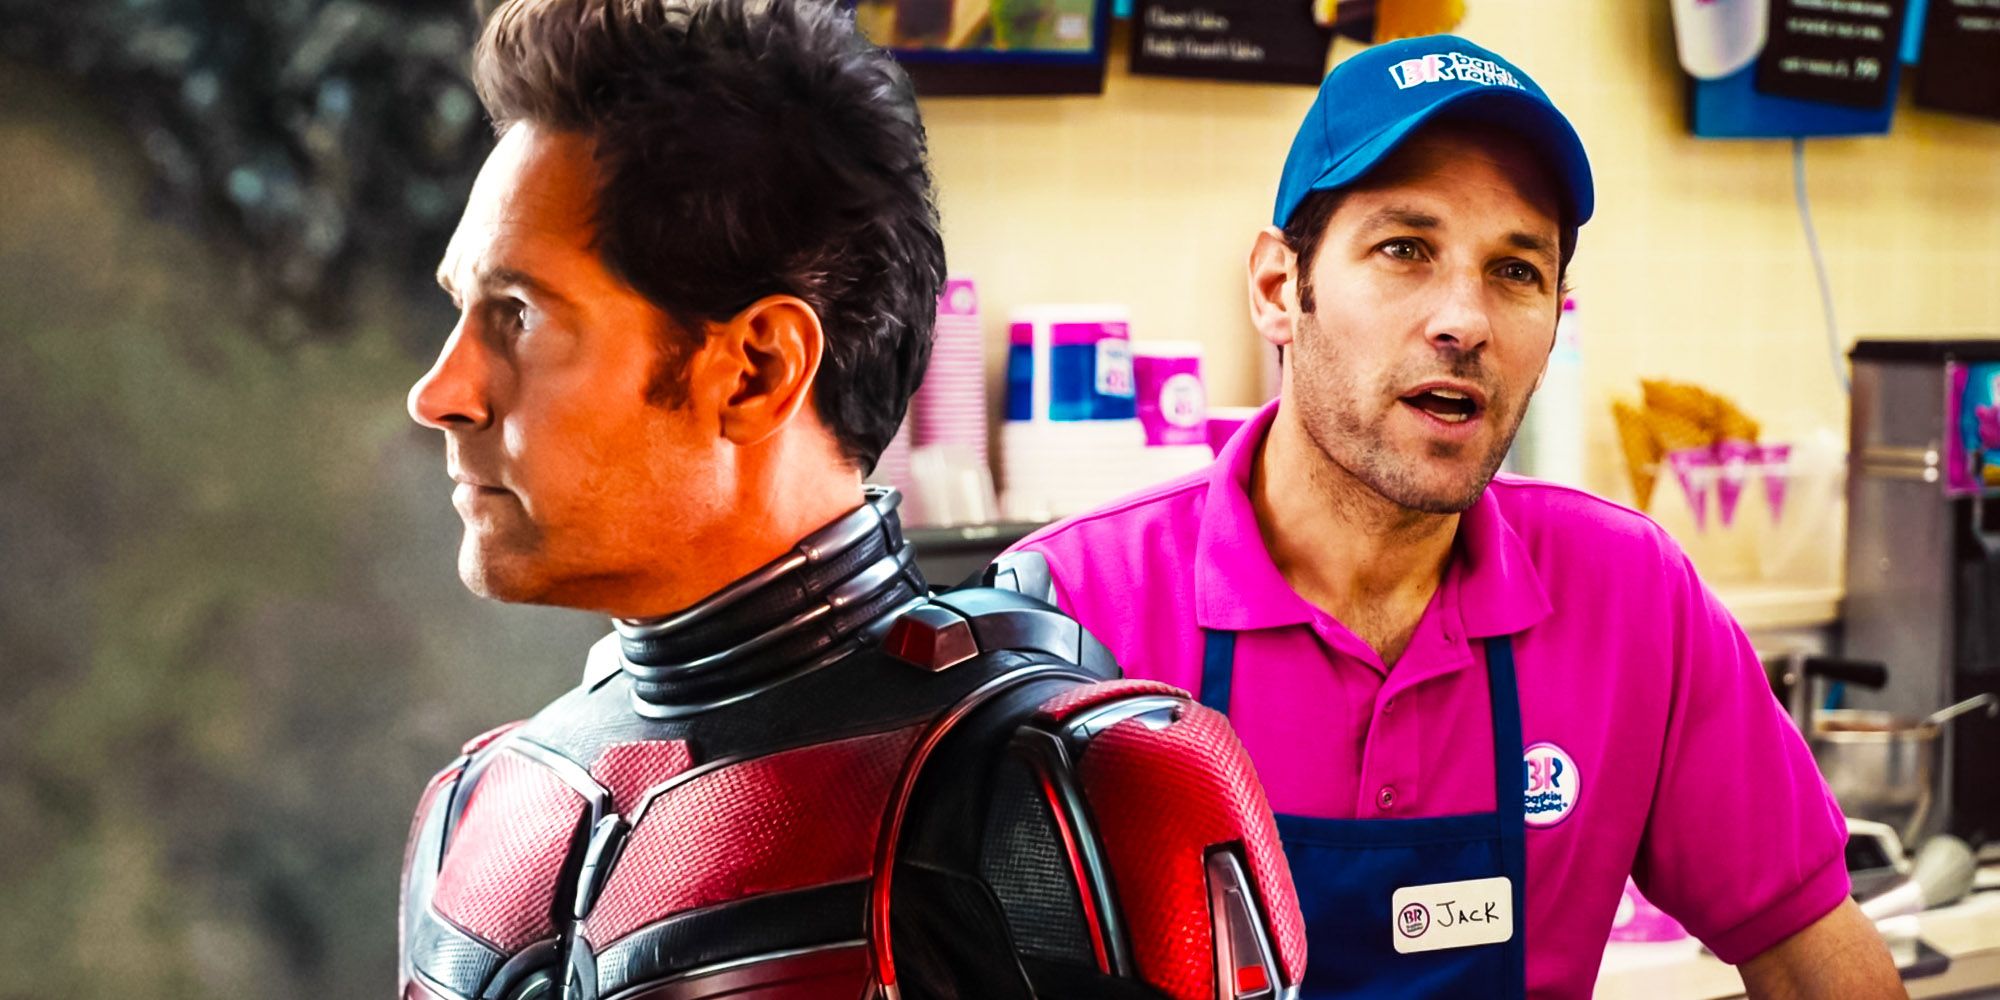 Antman and the wasp quantumania paul rudd